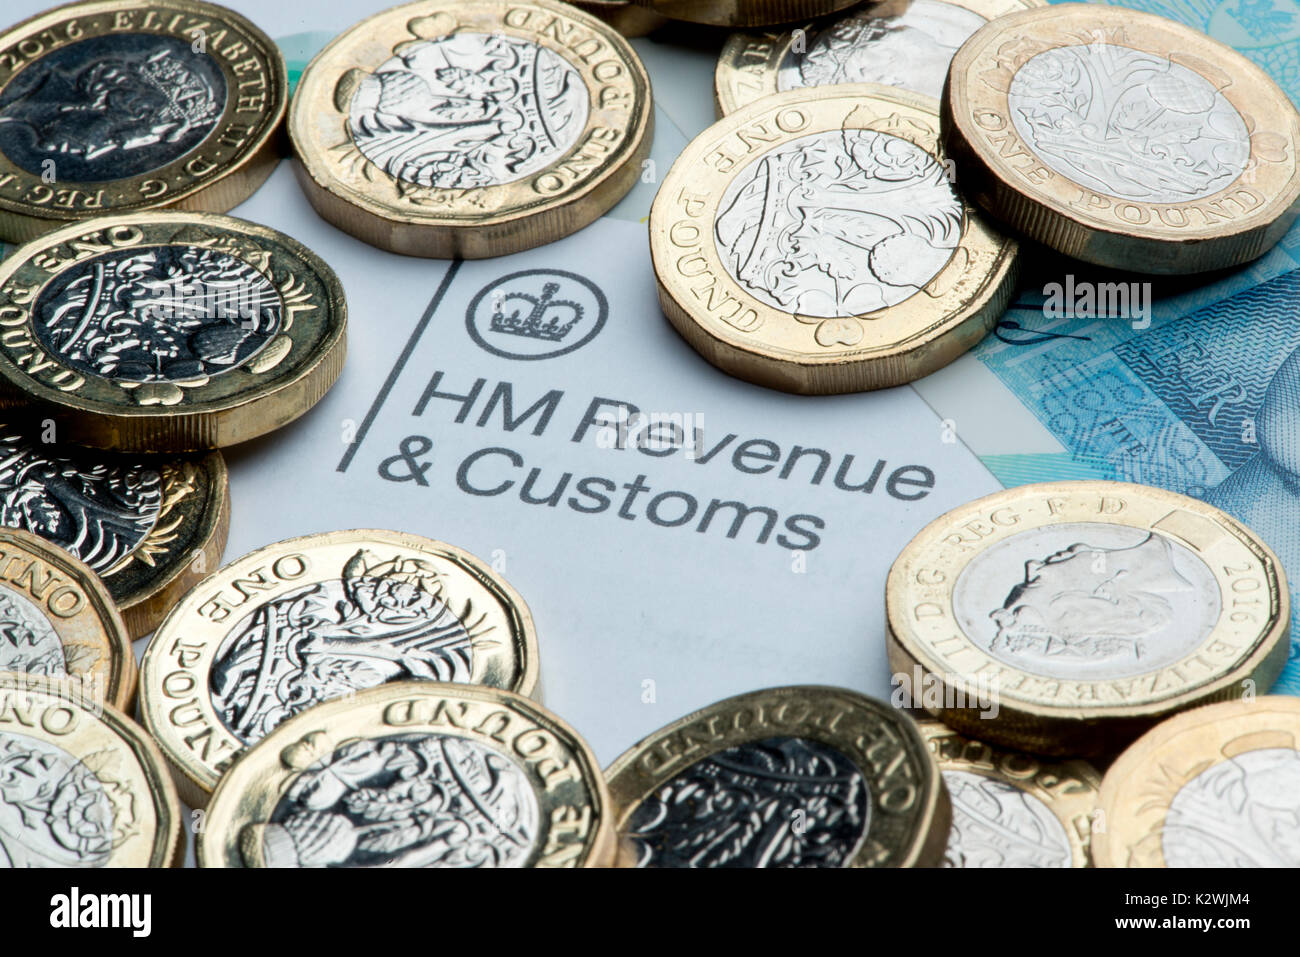 An HM Revenues & Customs letterhead surrounded by new £1 coins and a £5 note. Stock Photo